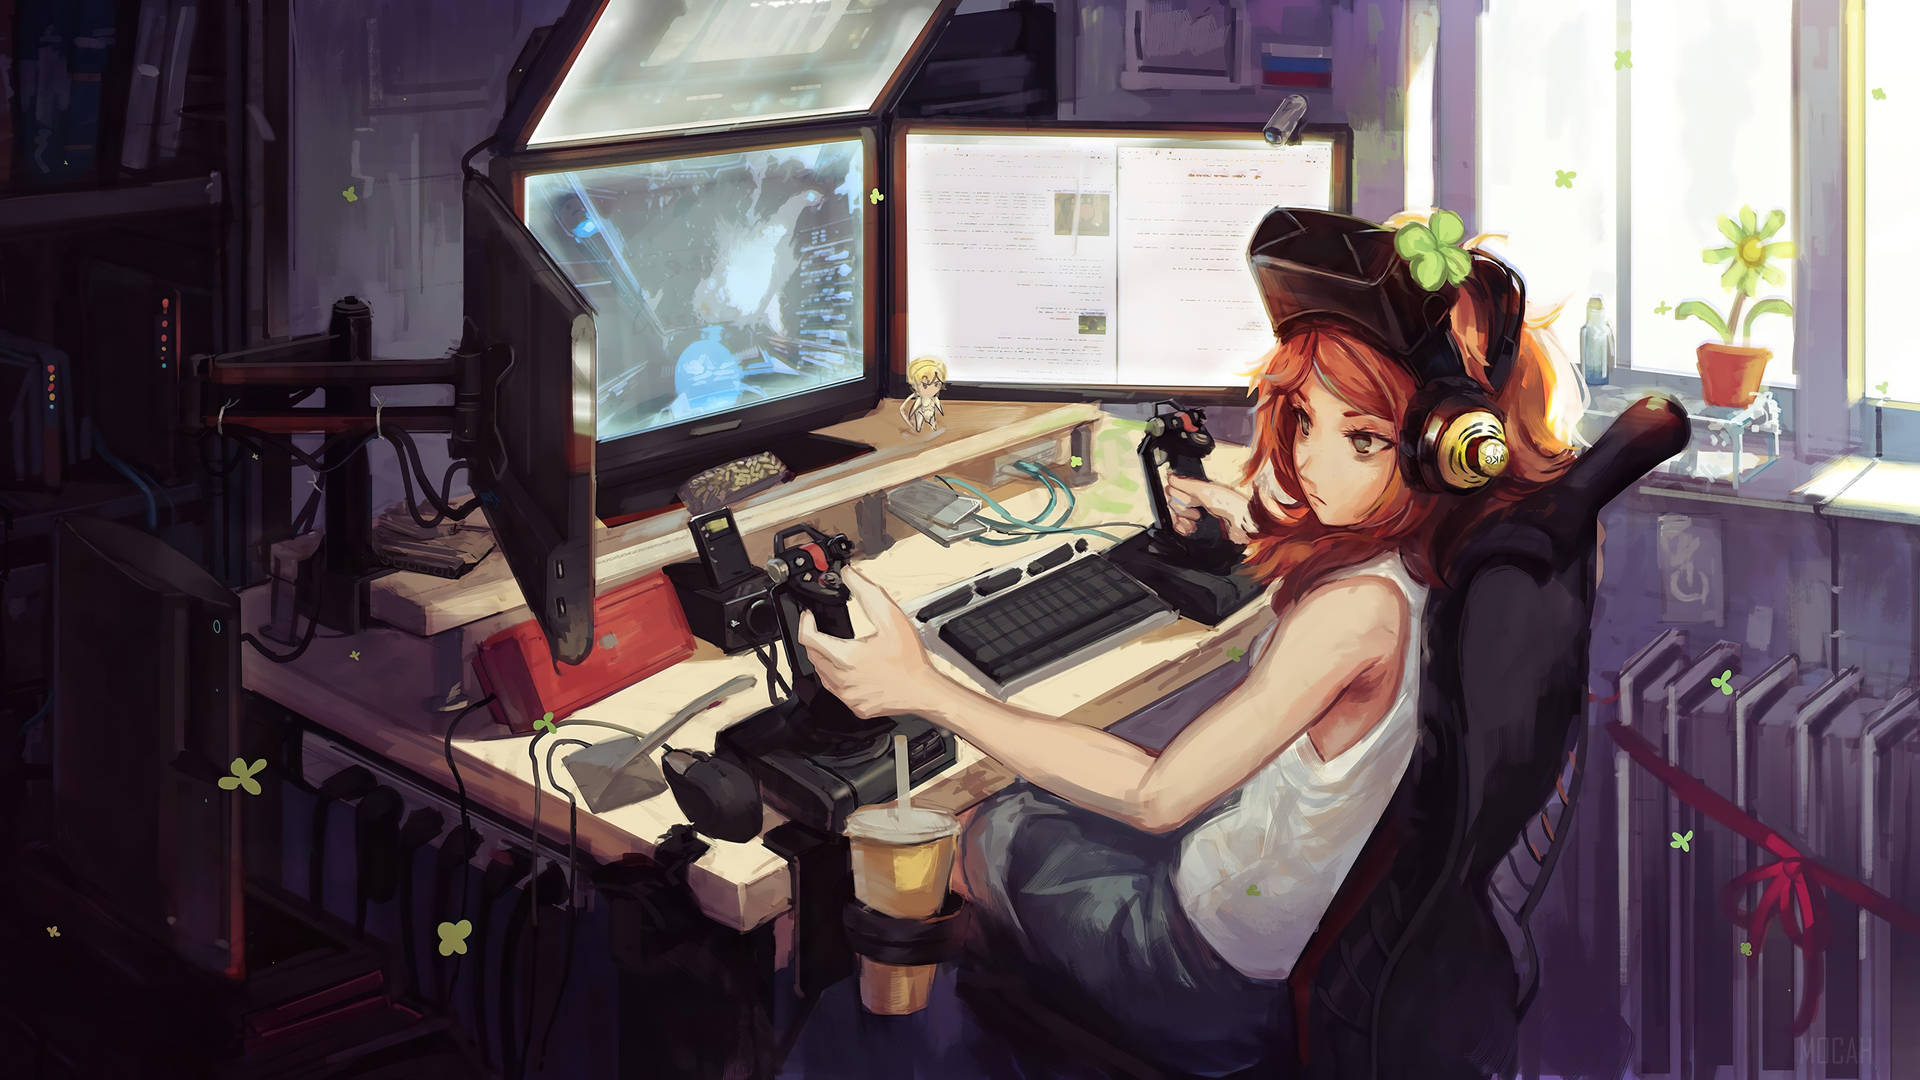 Anime Redhead Girl With Gaming Laptop Workstation